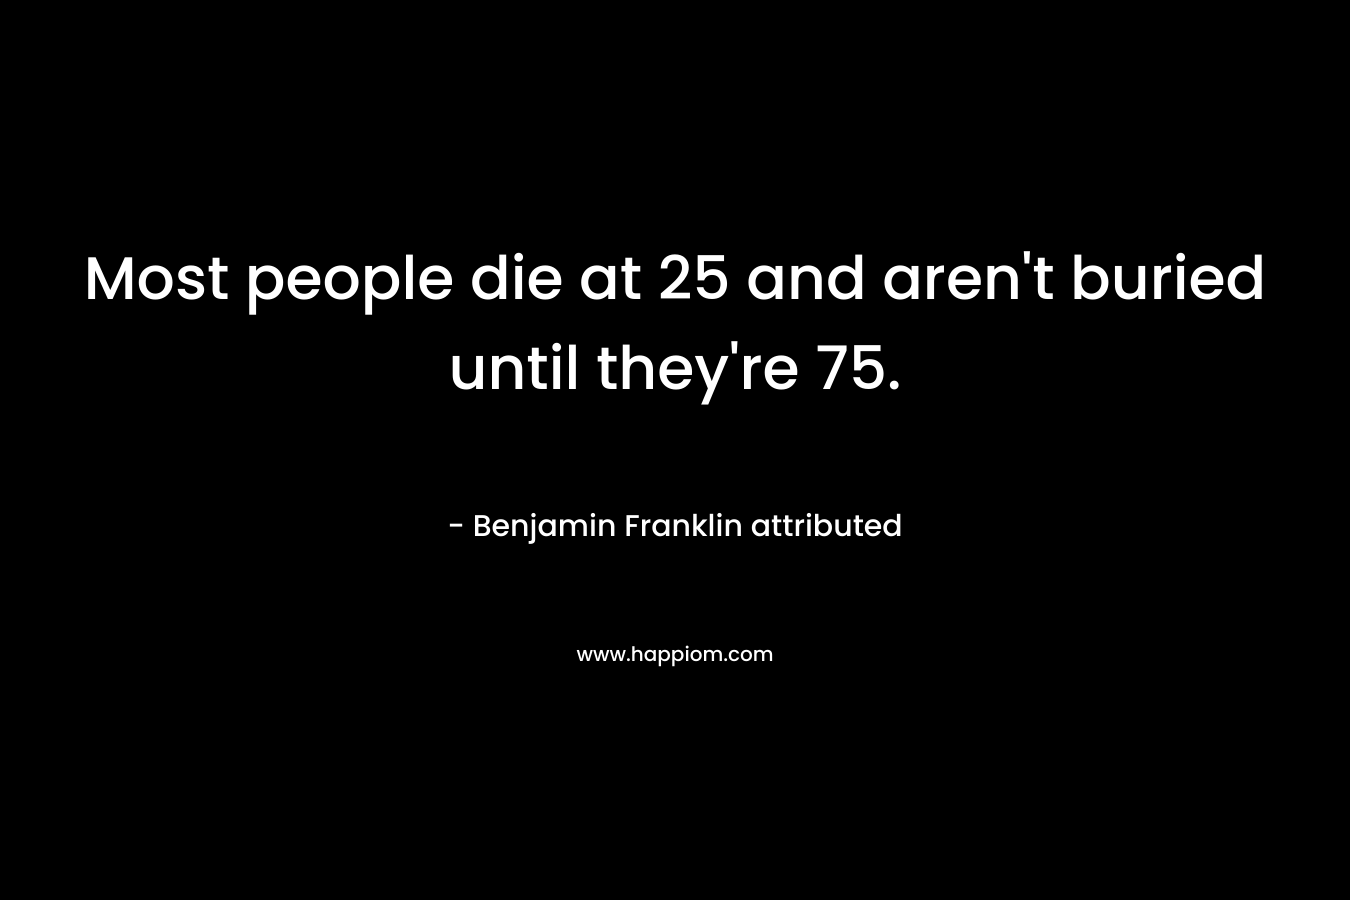 Most people die at 25 and aren’t buried until they’re 75. – Benjamin Franklin attributed